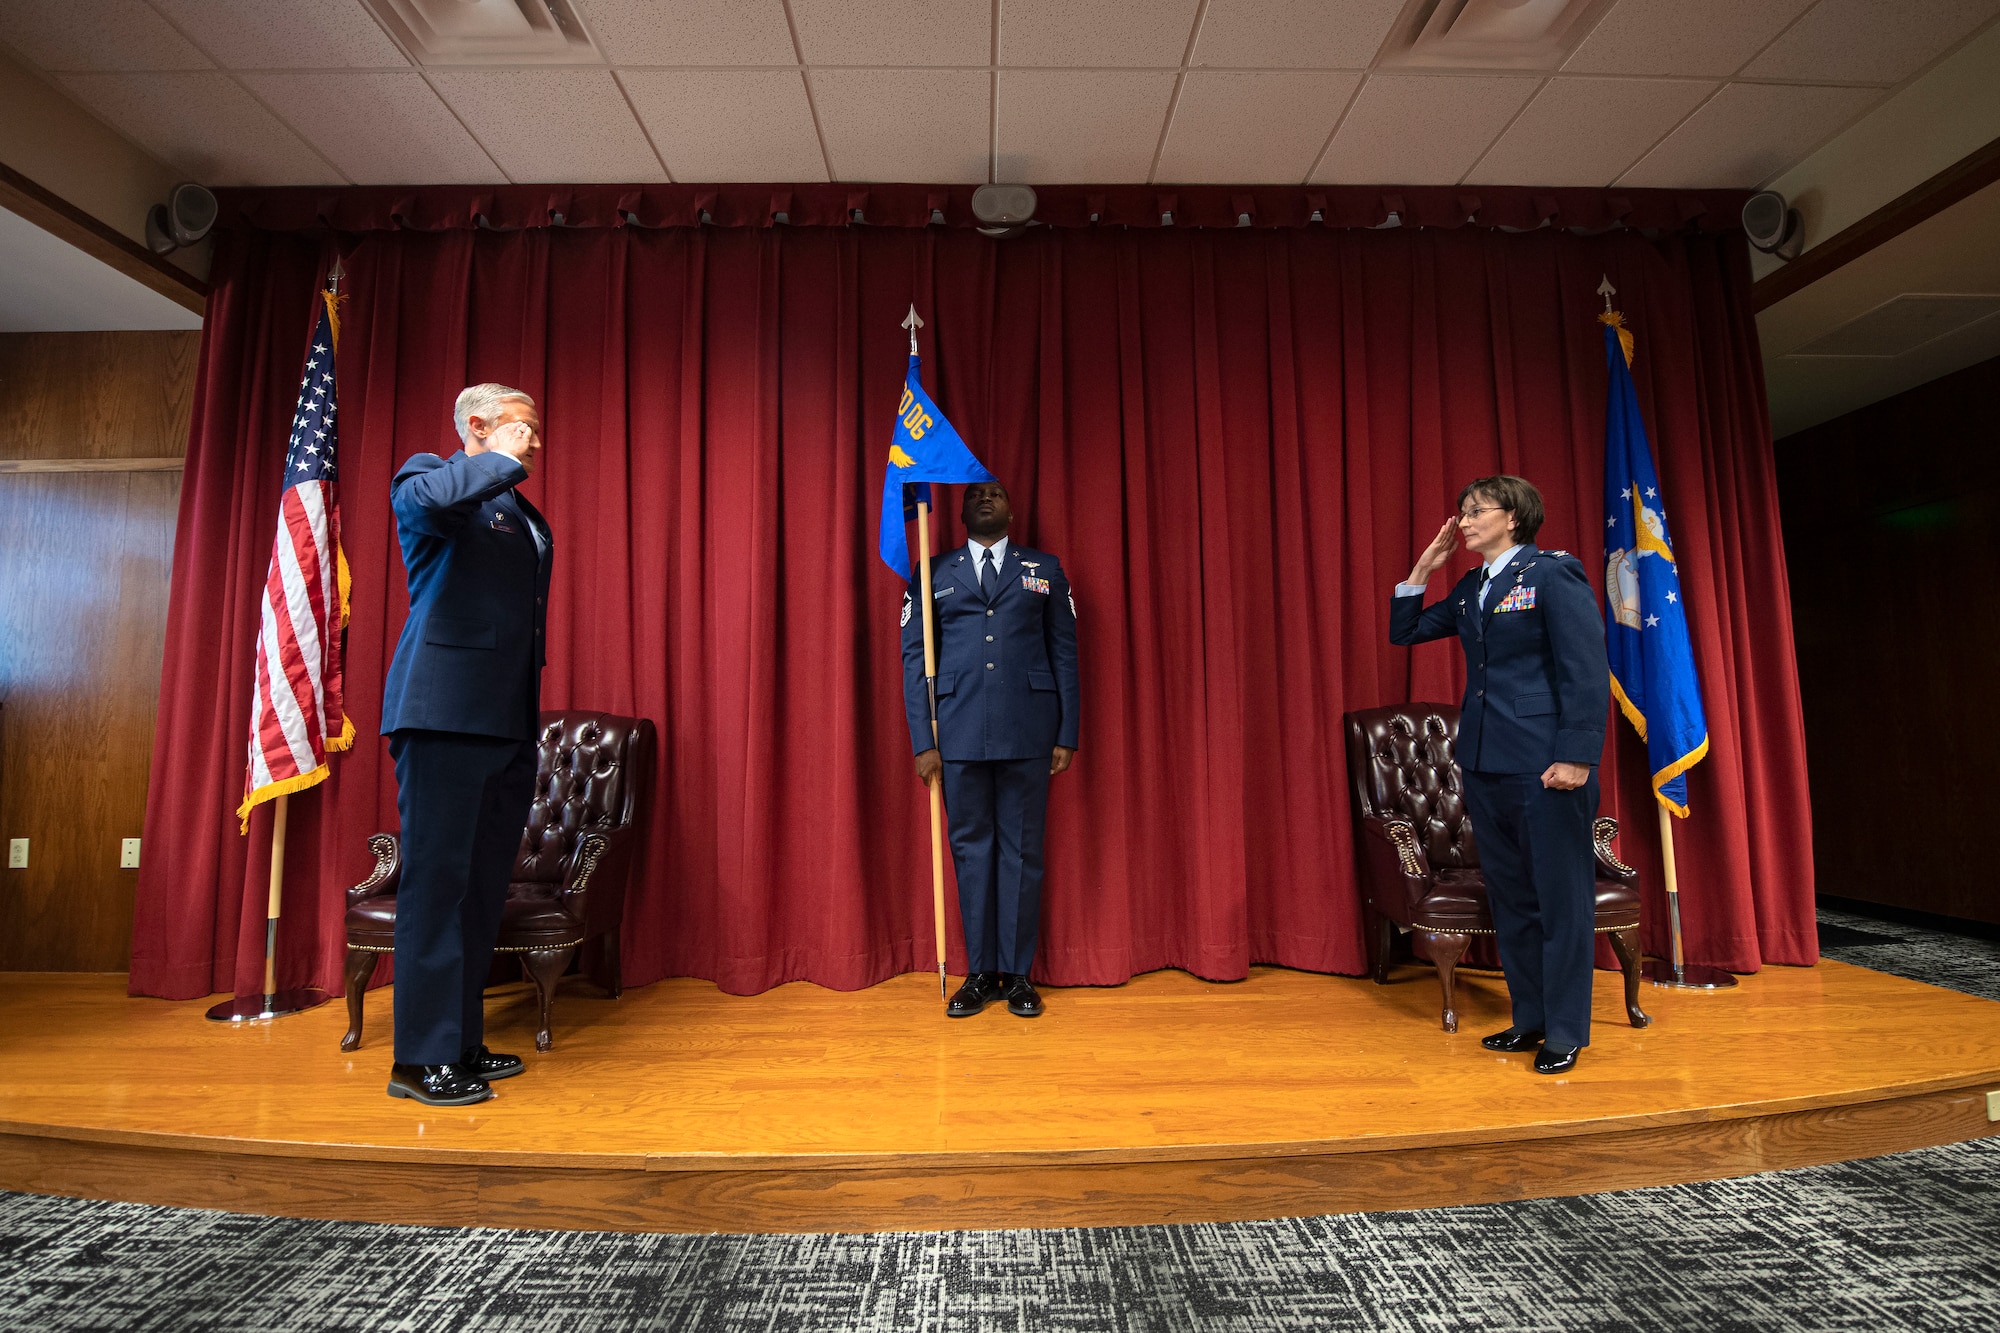 U.S. Air Force Col. Suzie Dietz, incoming 60th Aeromedical Evacuation Squadron commander, right, assumes command of the 60th AES from Col. Gregg Johnson, 60th Operations Group commander, left, while Master Sgt. Ryan Wallace, 60th AES acting superintendent, holds the guidon June 9, 2020, at Travis Air Force Base, California.